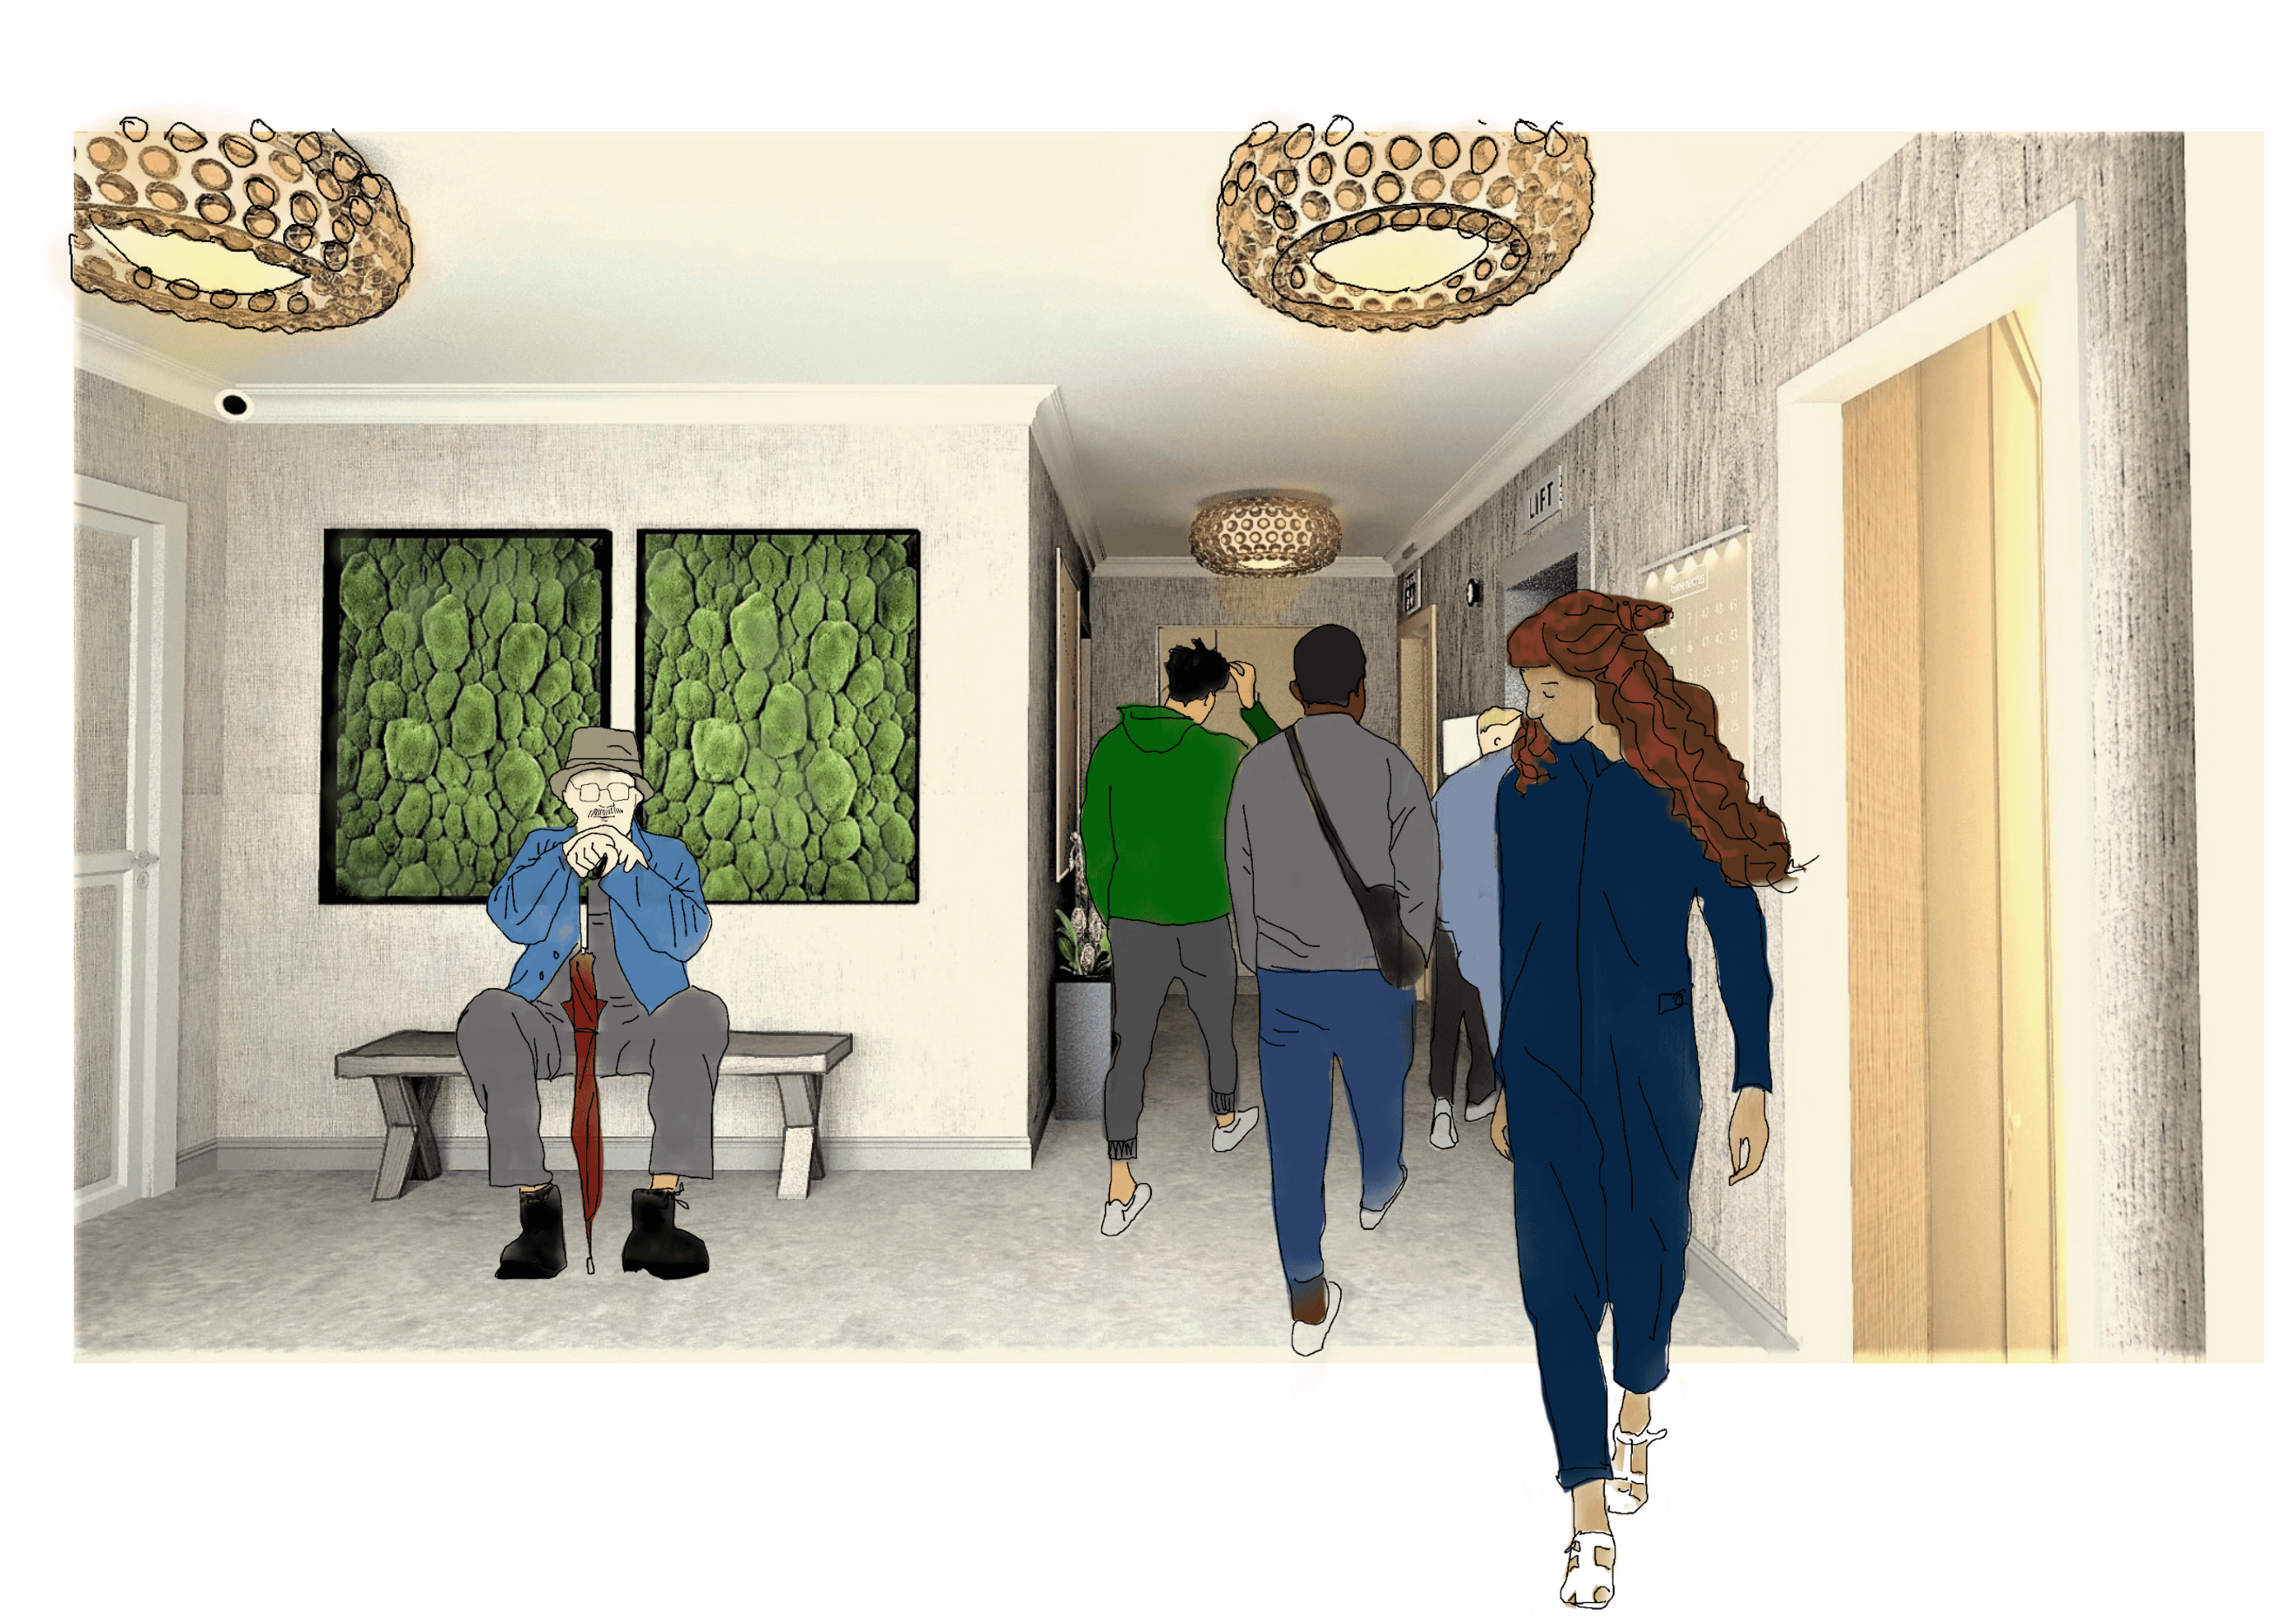 Illustration of block of flats communal hallway with people